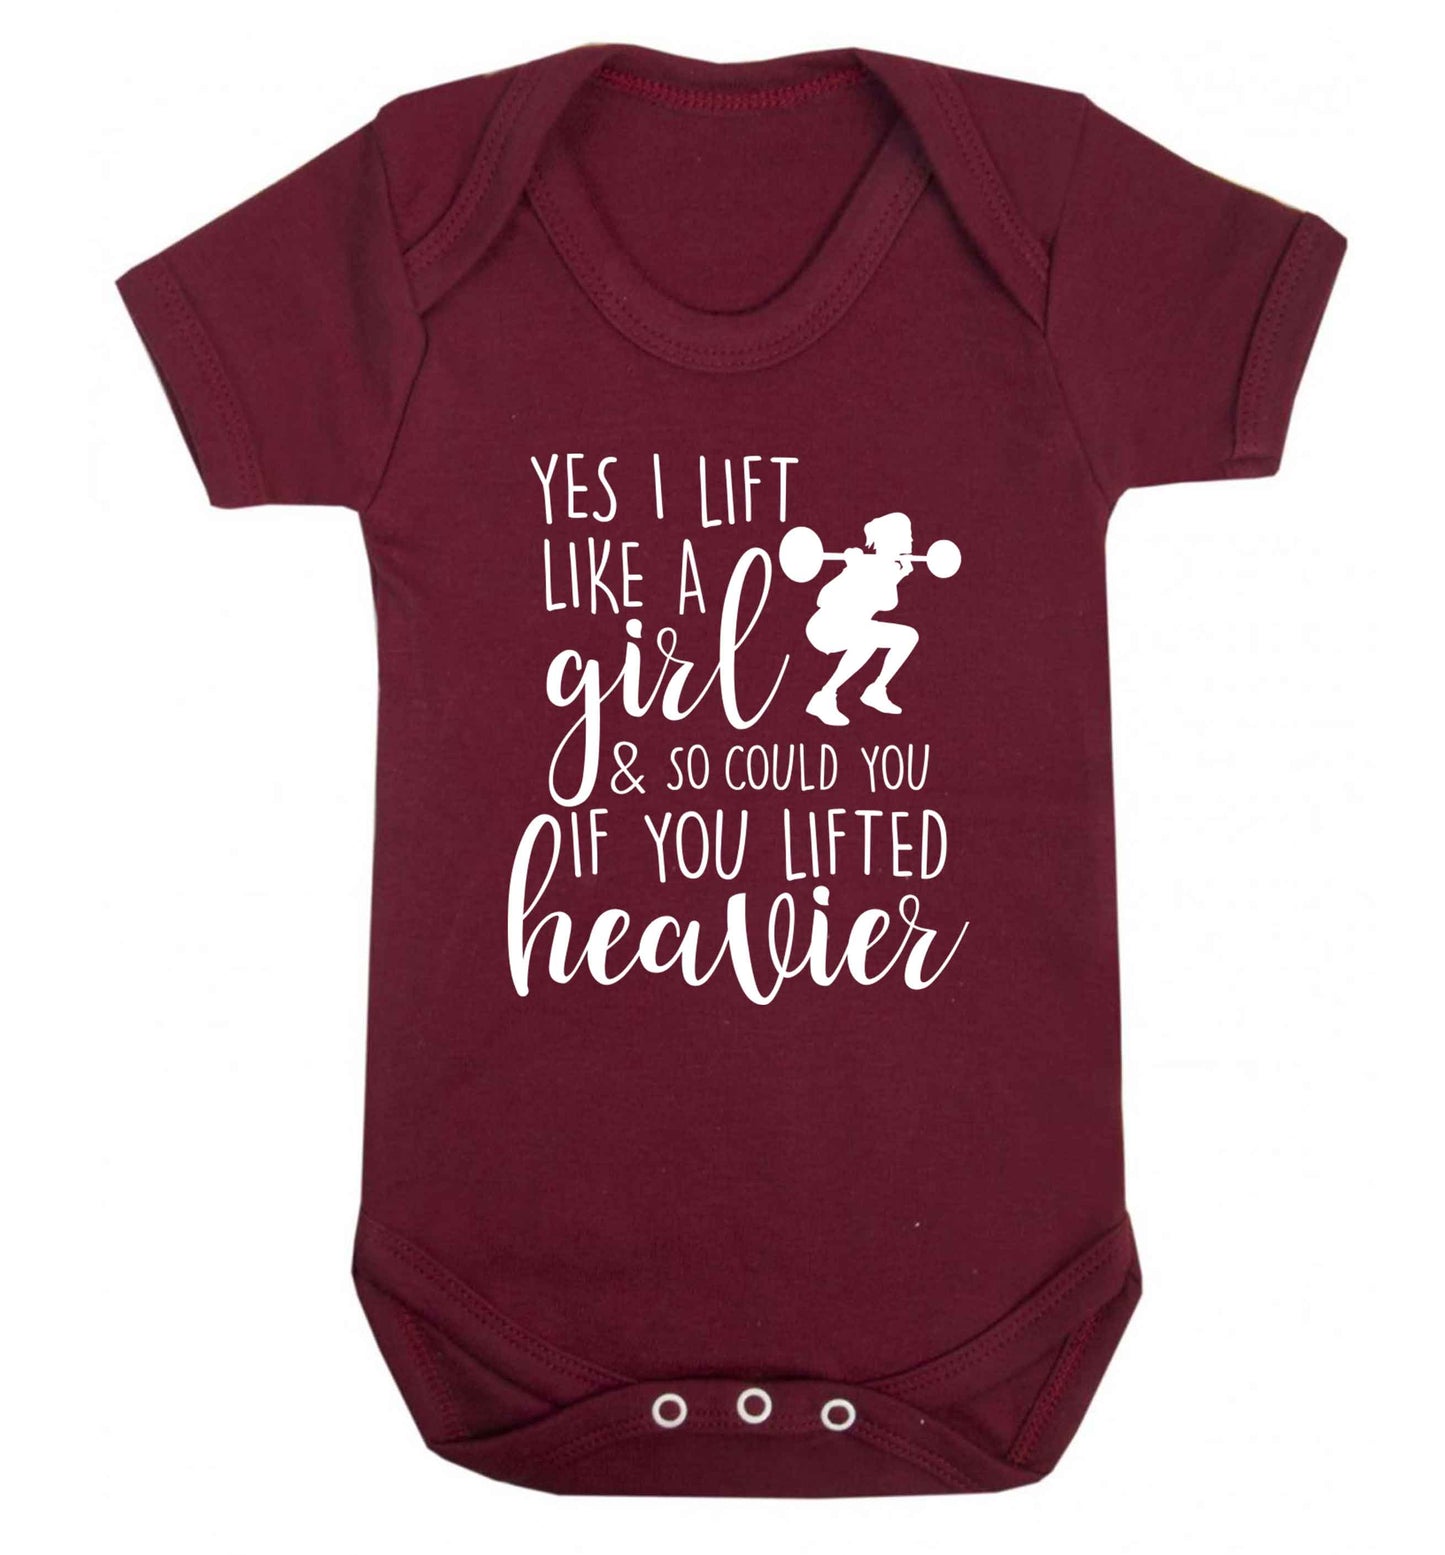 Yes I lift like a girl and so could you if you lifted heavier Baby Vest maroon 18-24 months